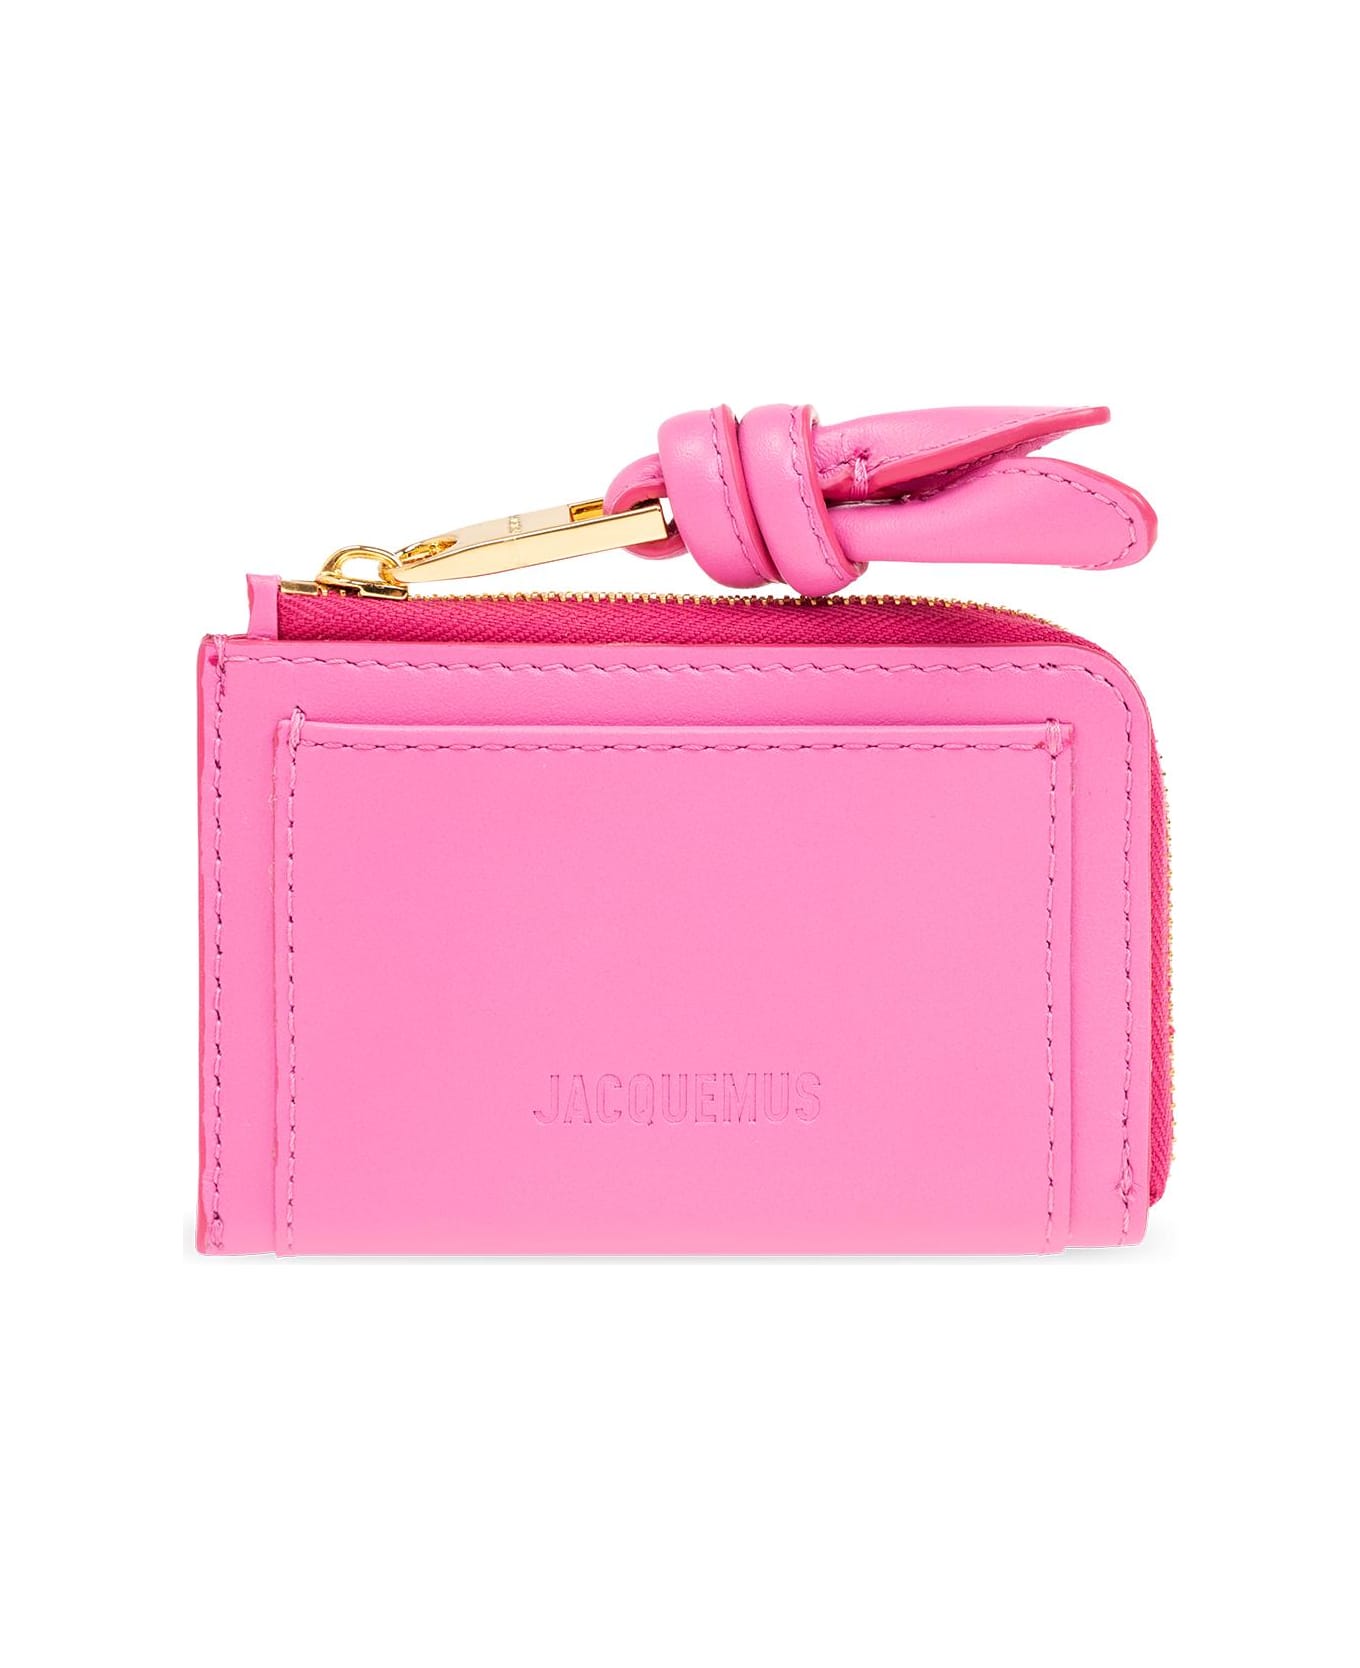 Jacquemus Leather Card Case - Pink